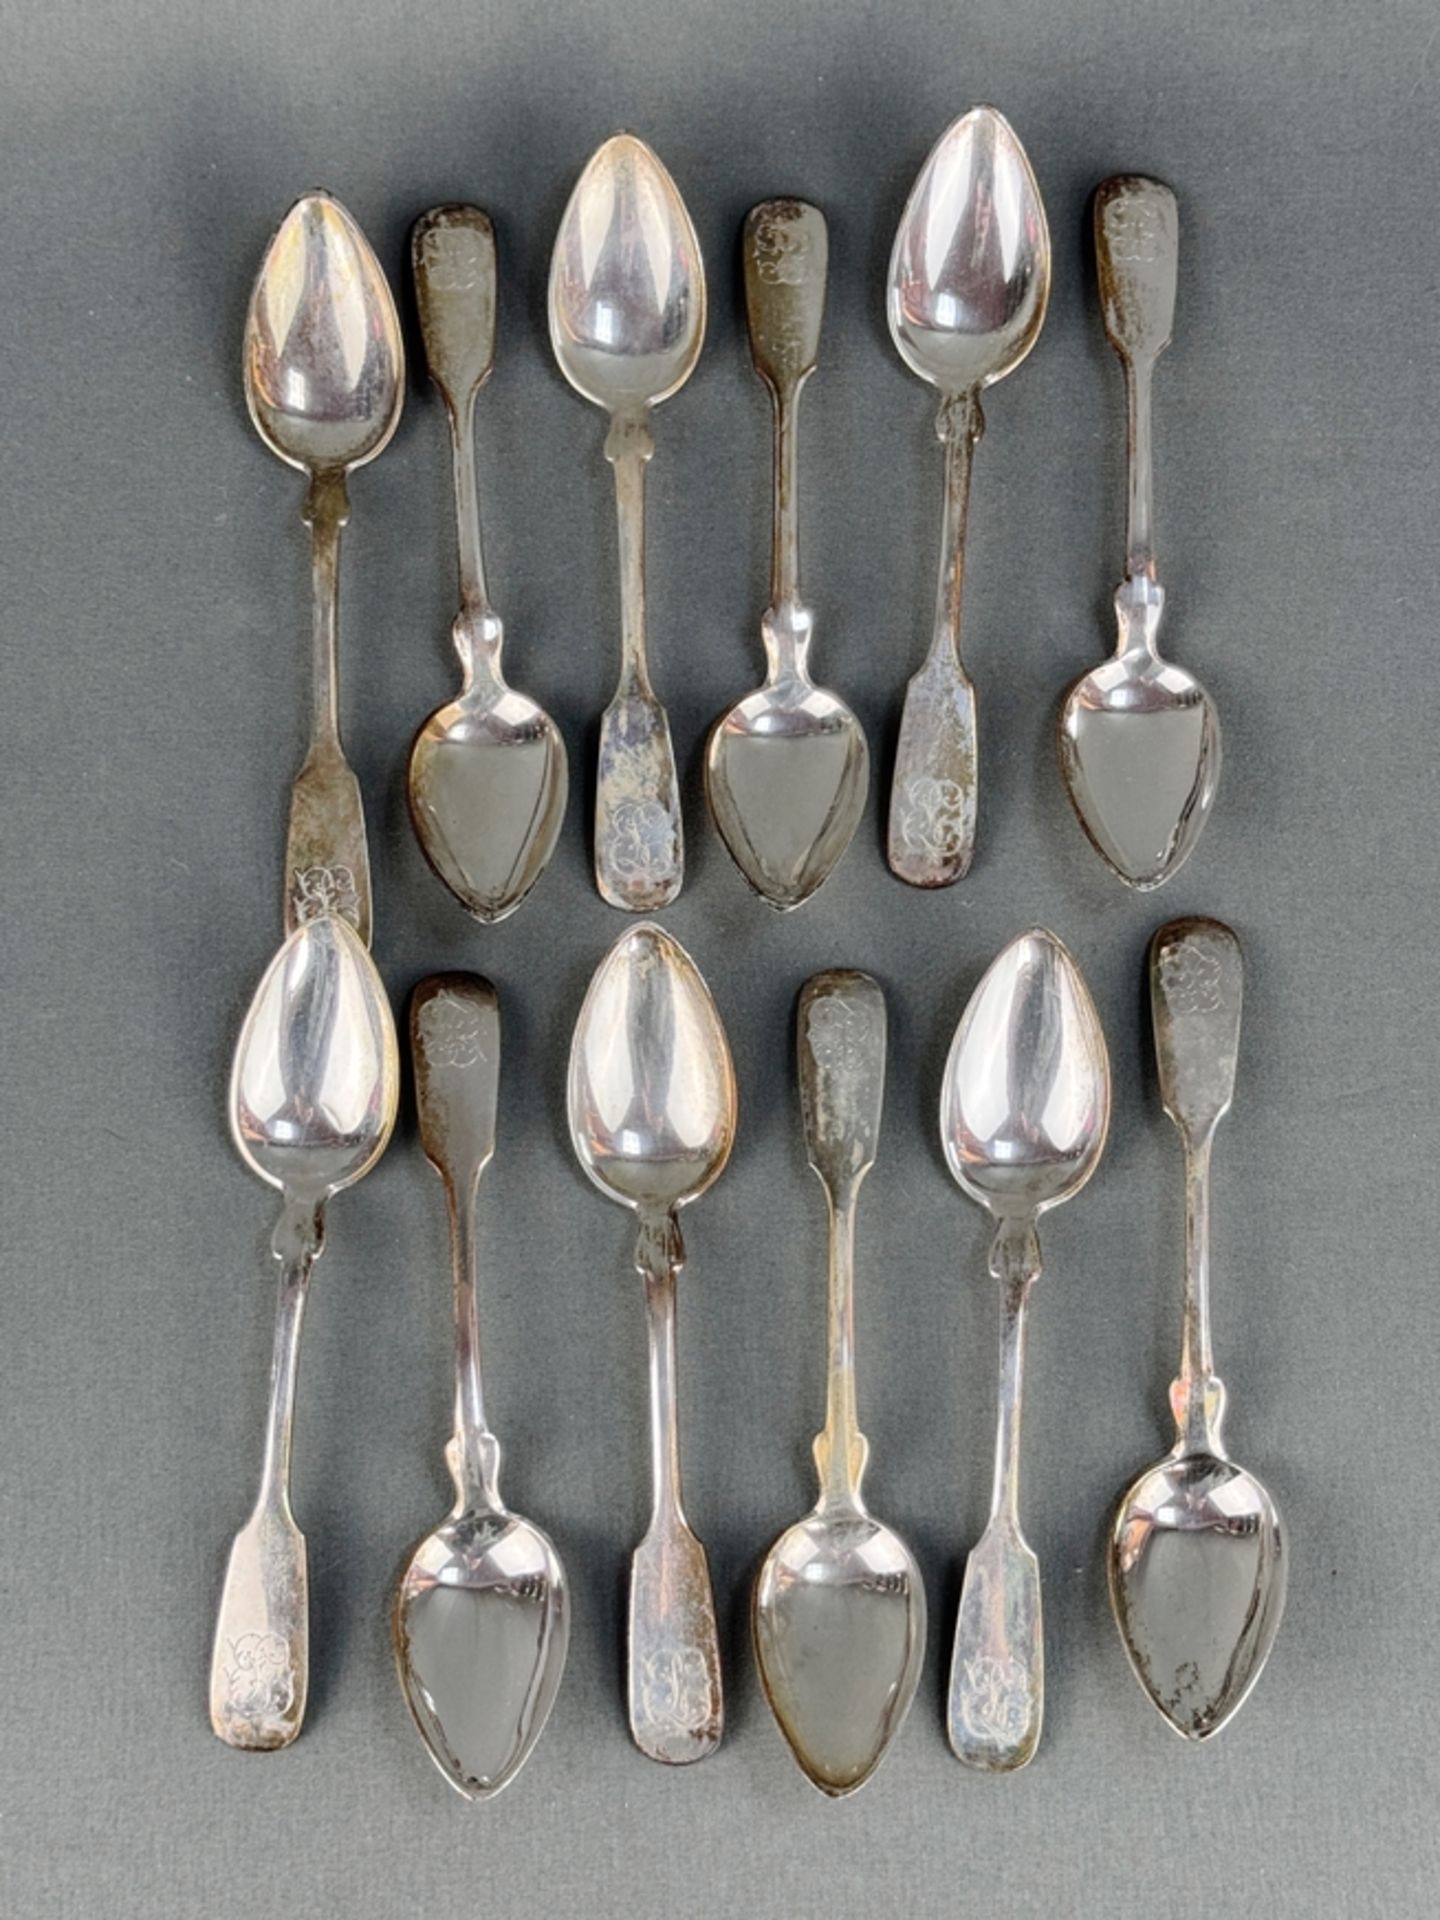 12 coffee spoons, W. Ascherfeld, silver 800, 347g, tapered spoon, ends with monogram, length 15cm, - Image 2 of 3